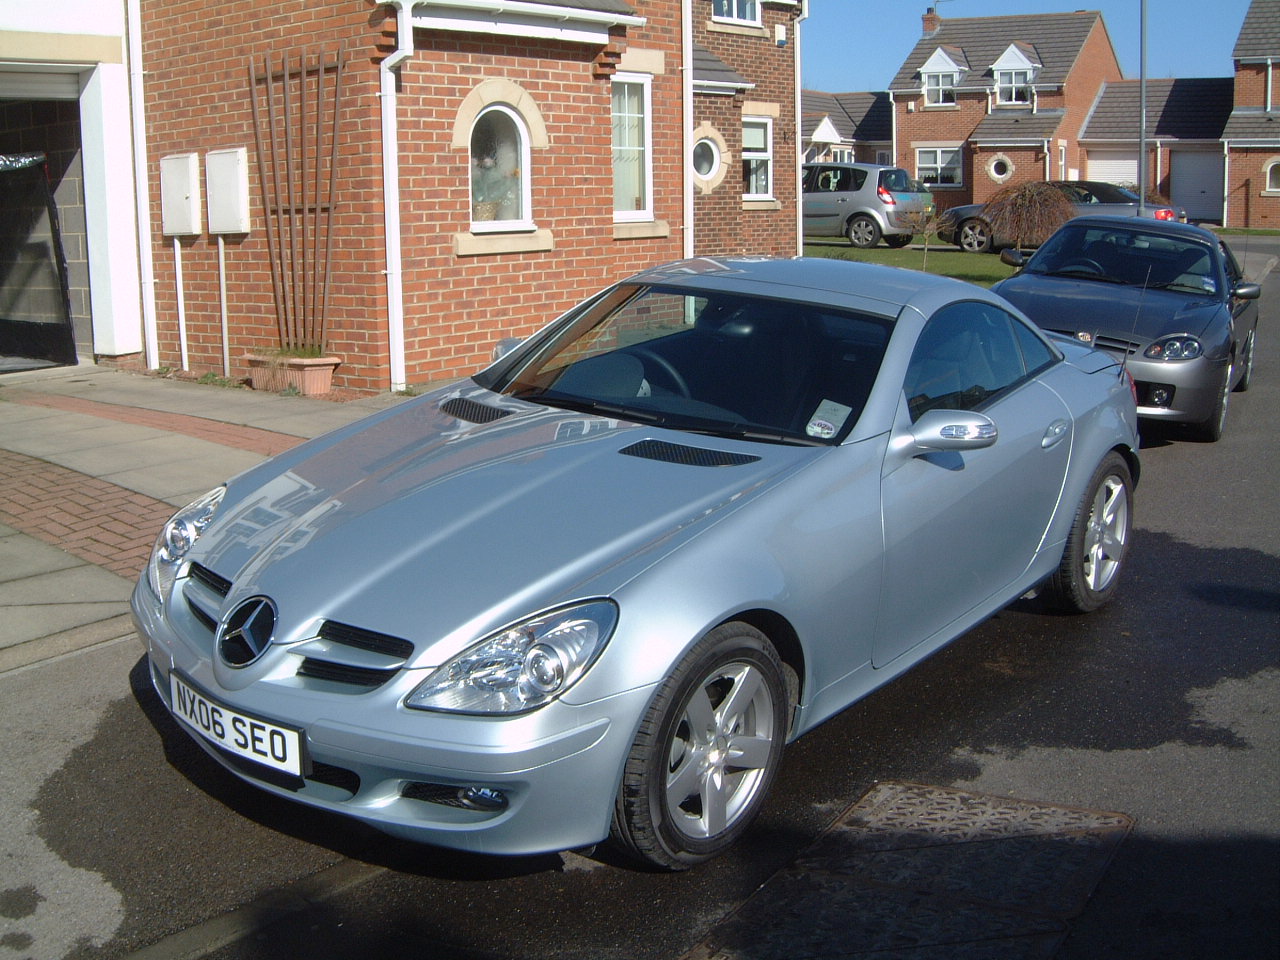 Pro and cons of the 2006 mercedes benze slk 280 #7